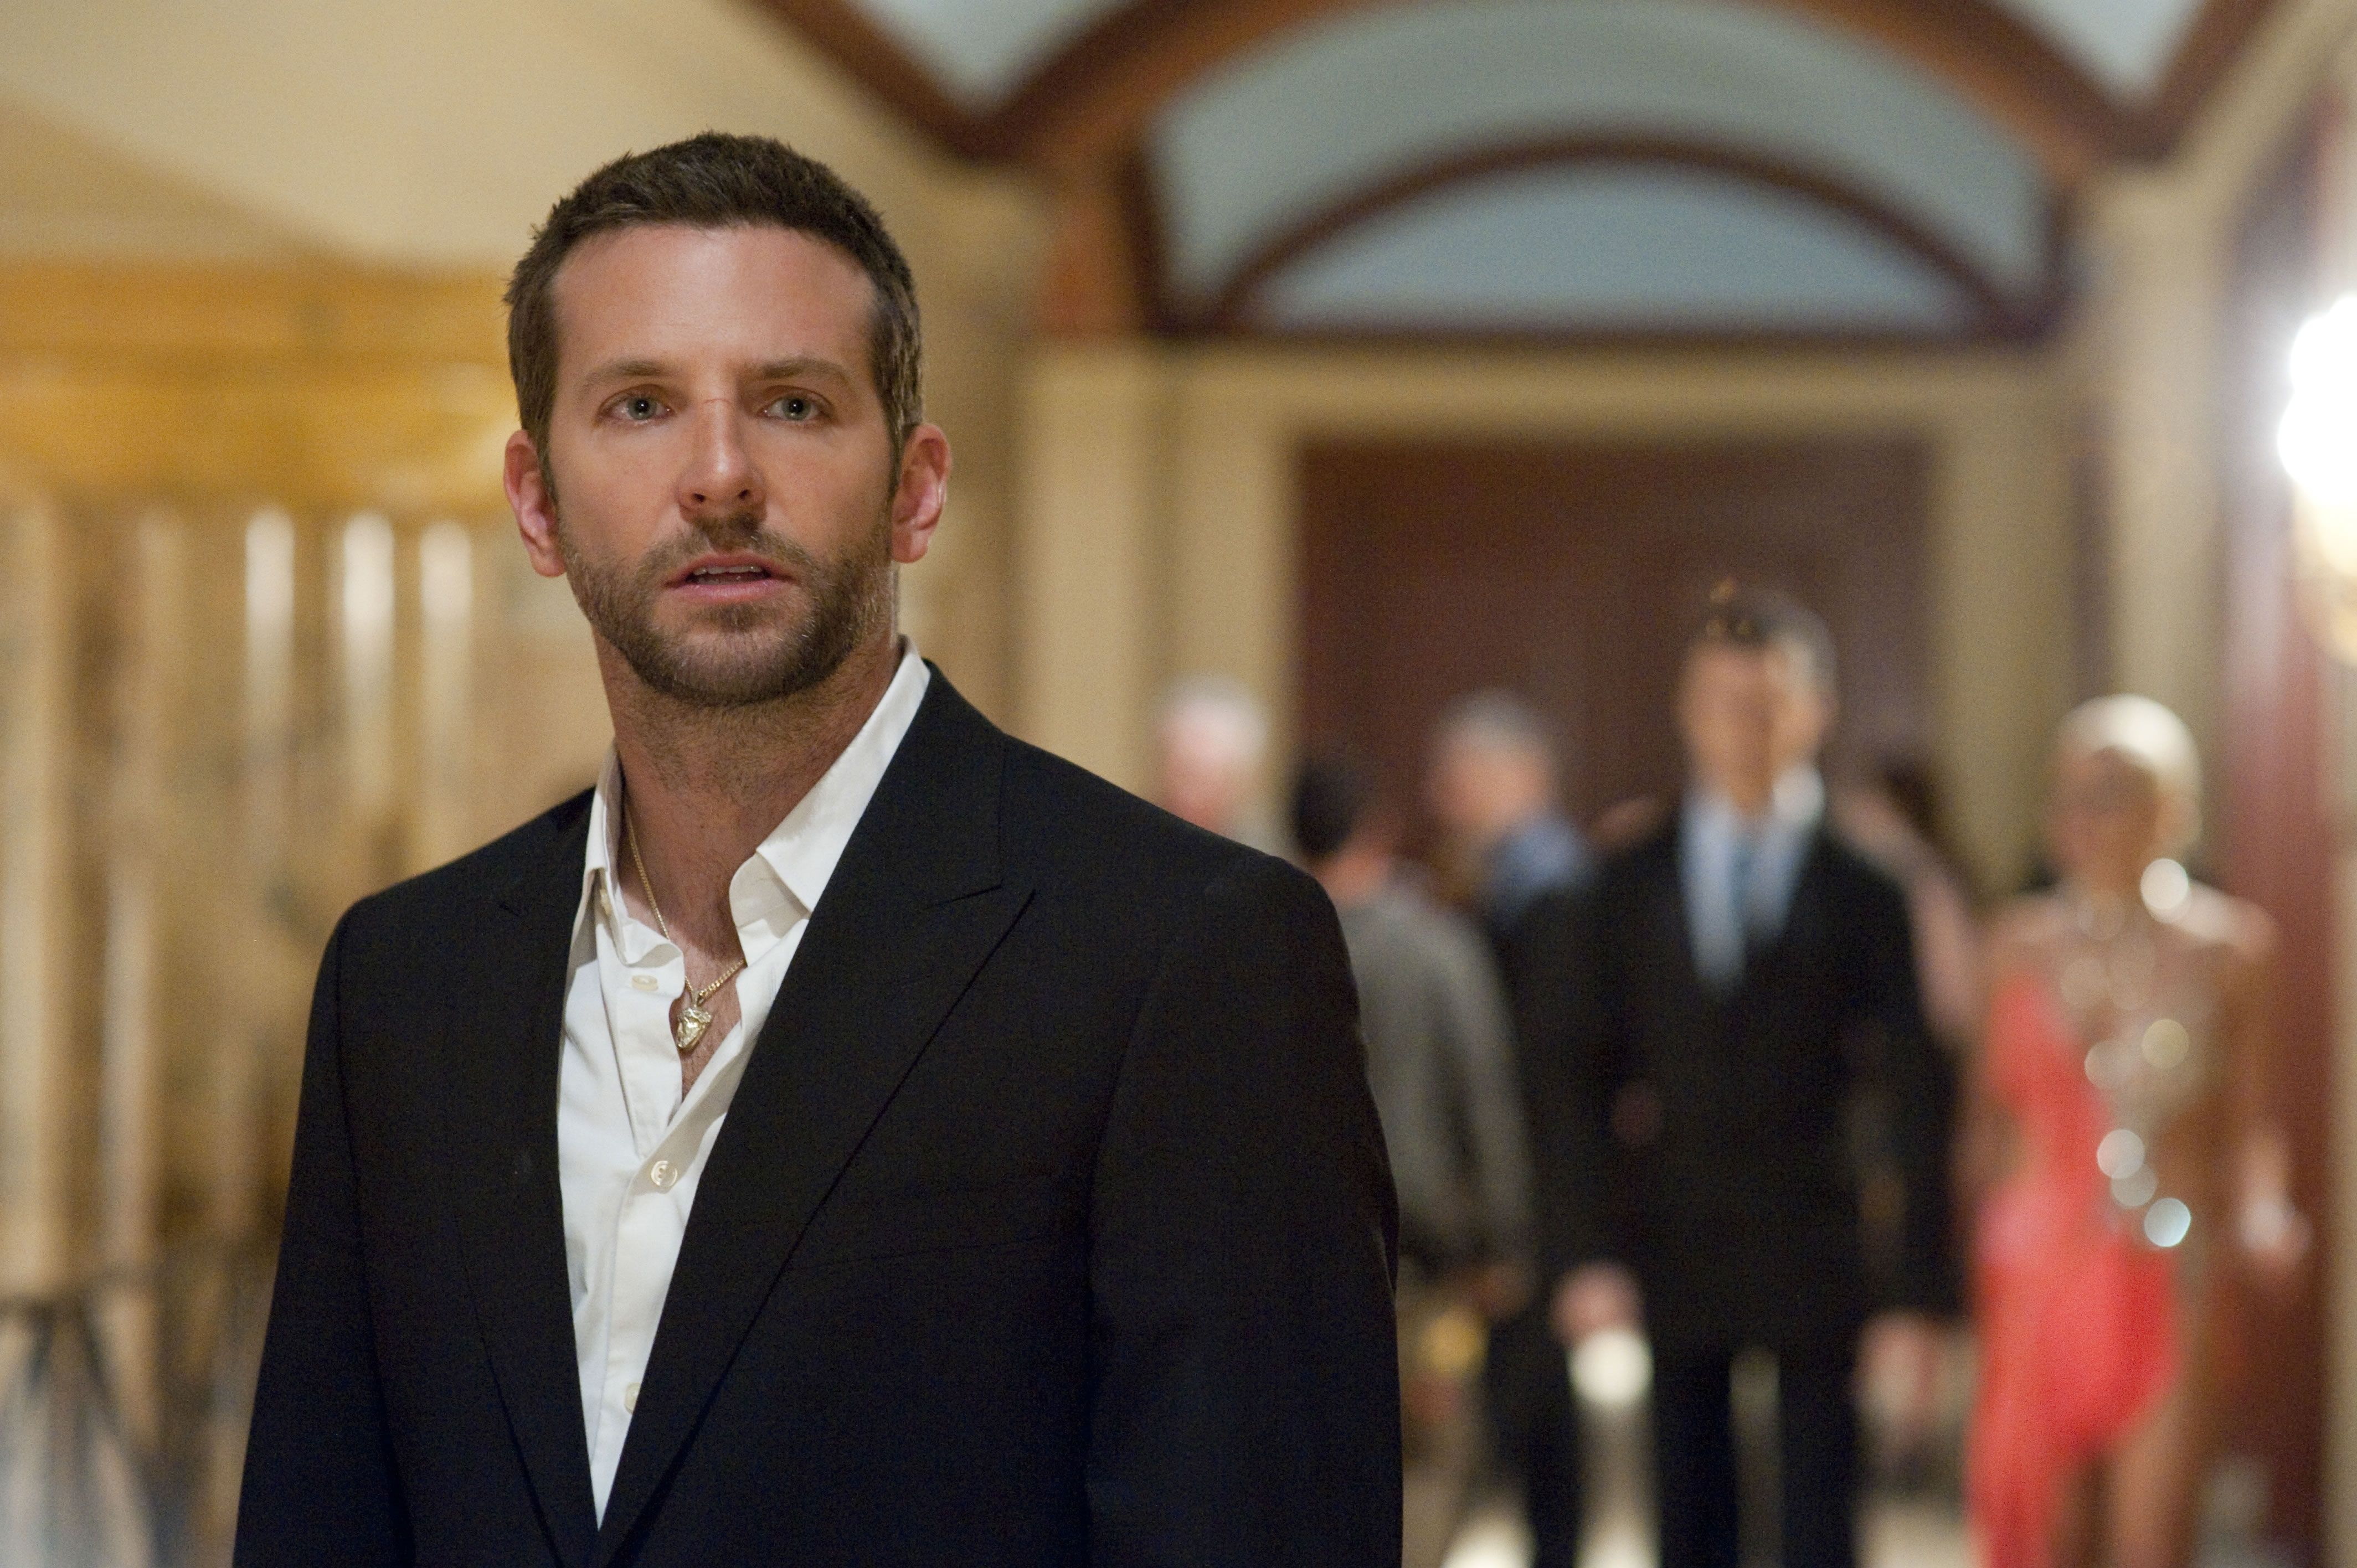 THE SILVER LININGS PLAYBOOK Images Starring Bradley Cooper and Jennifer Lawrence ...4256 x 2832